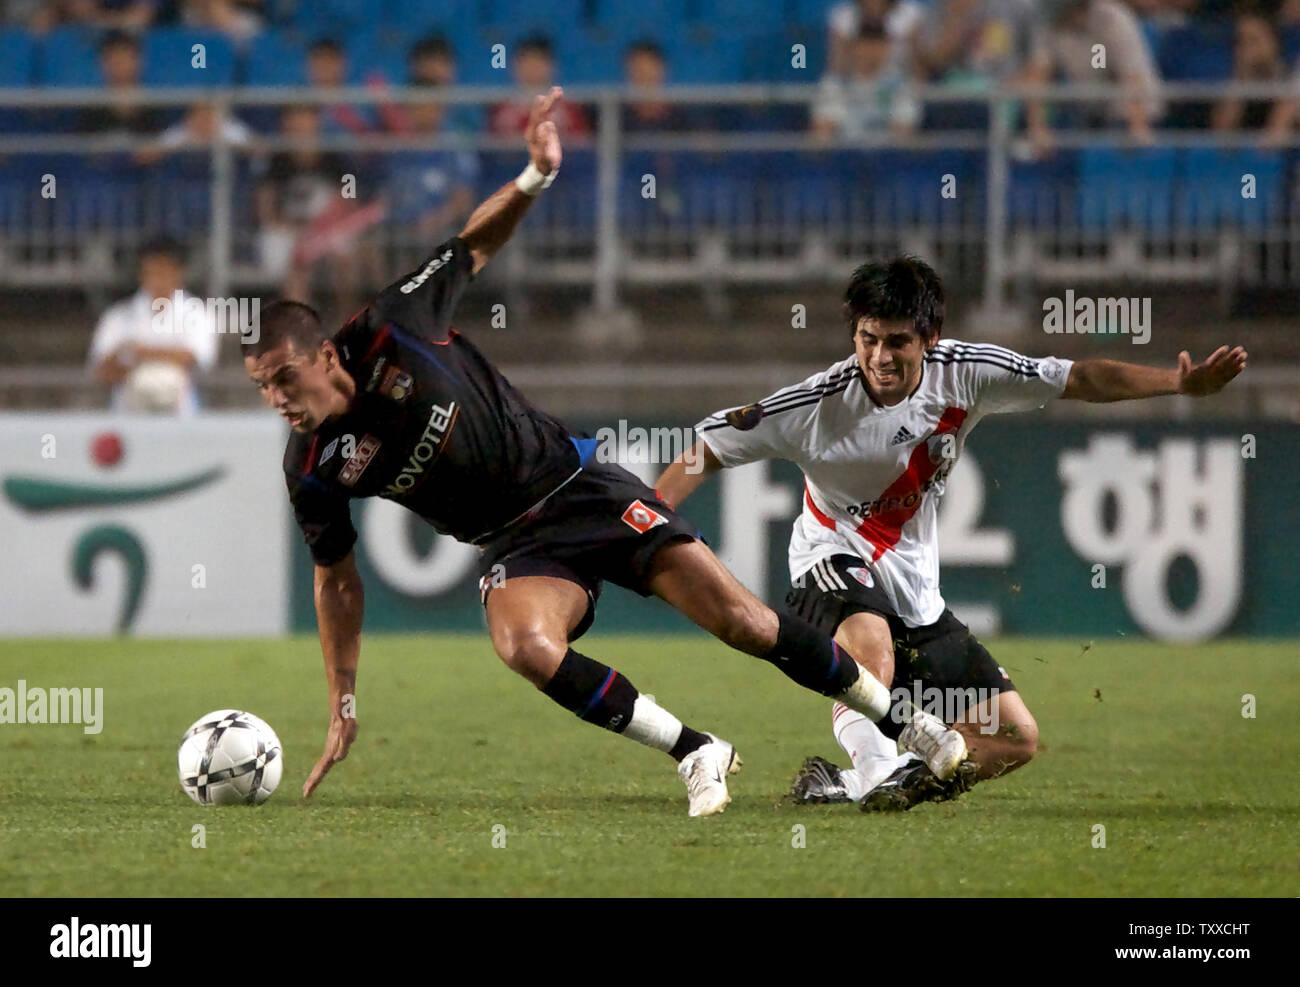 Hatem Ben Arfa (L) of Lyonnais, France, and Villagra of River Plate, Argentine, battle for the ball in the second half on the sixth day of the Peace Cup Korea 2007 at the Suwon Worldcup Stadium, South Korea, on July 19, 2007. Lyonnais beat River Plate 3-1. (UPI Photo/Keizo Mori) Stock Photo